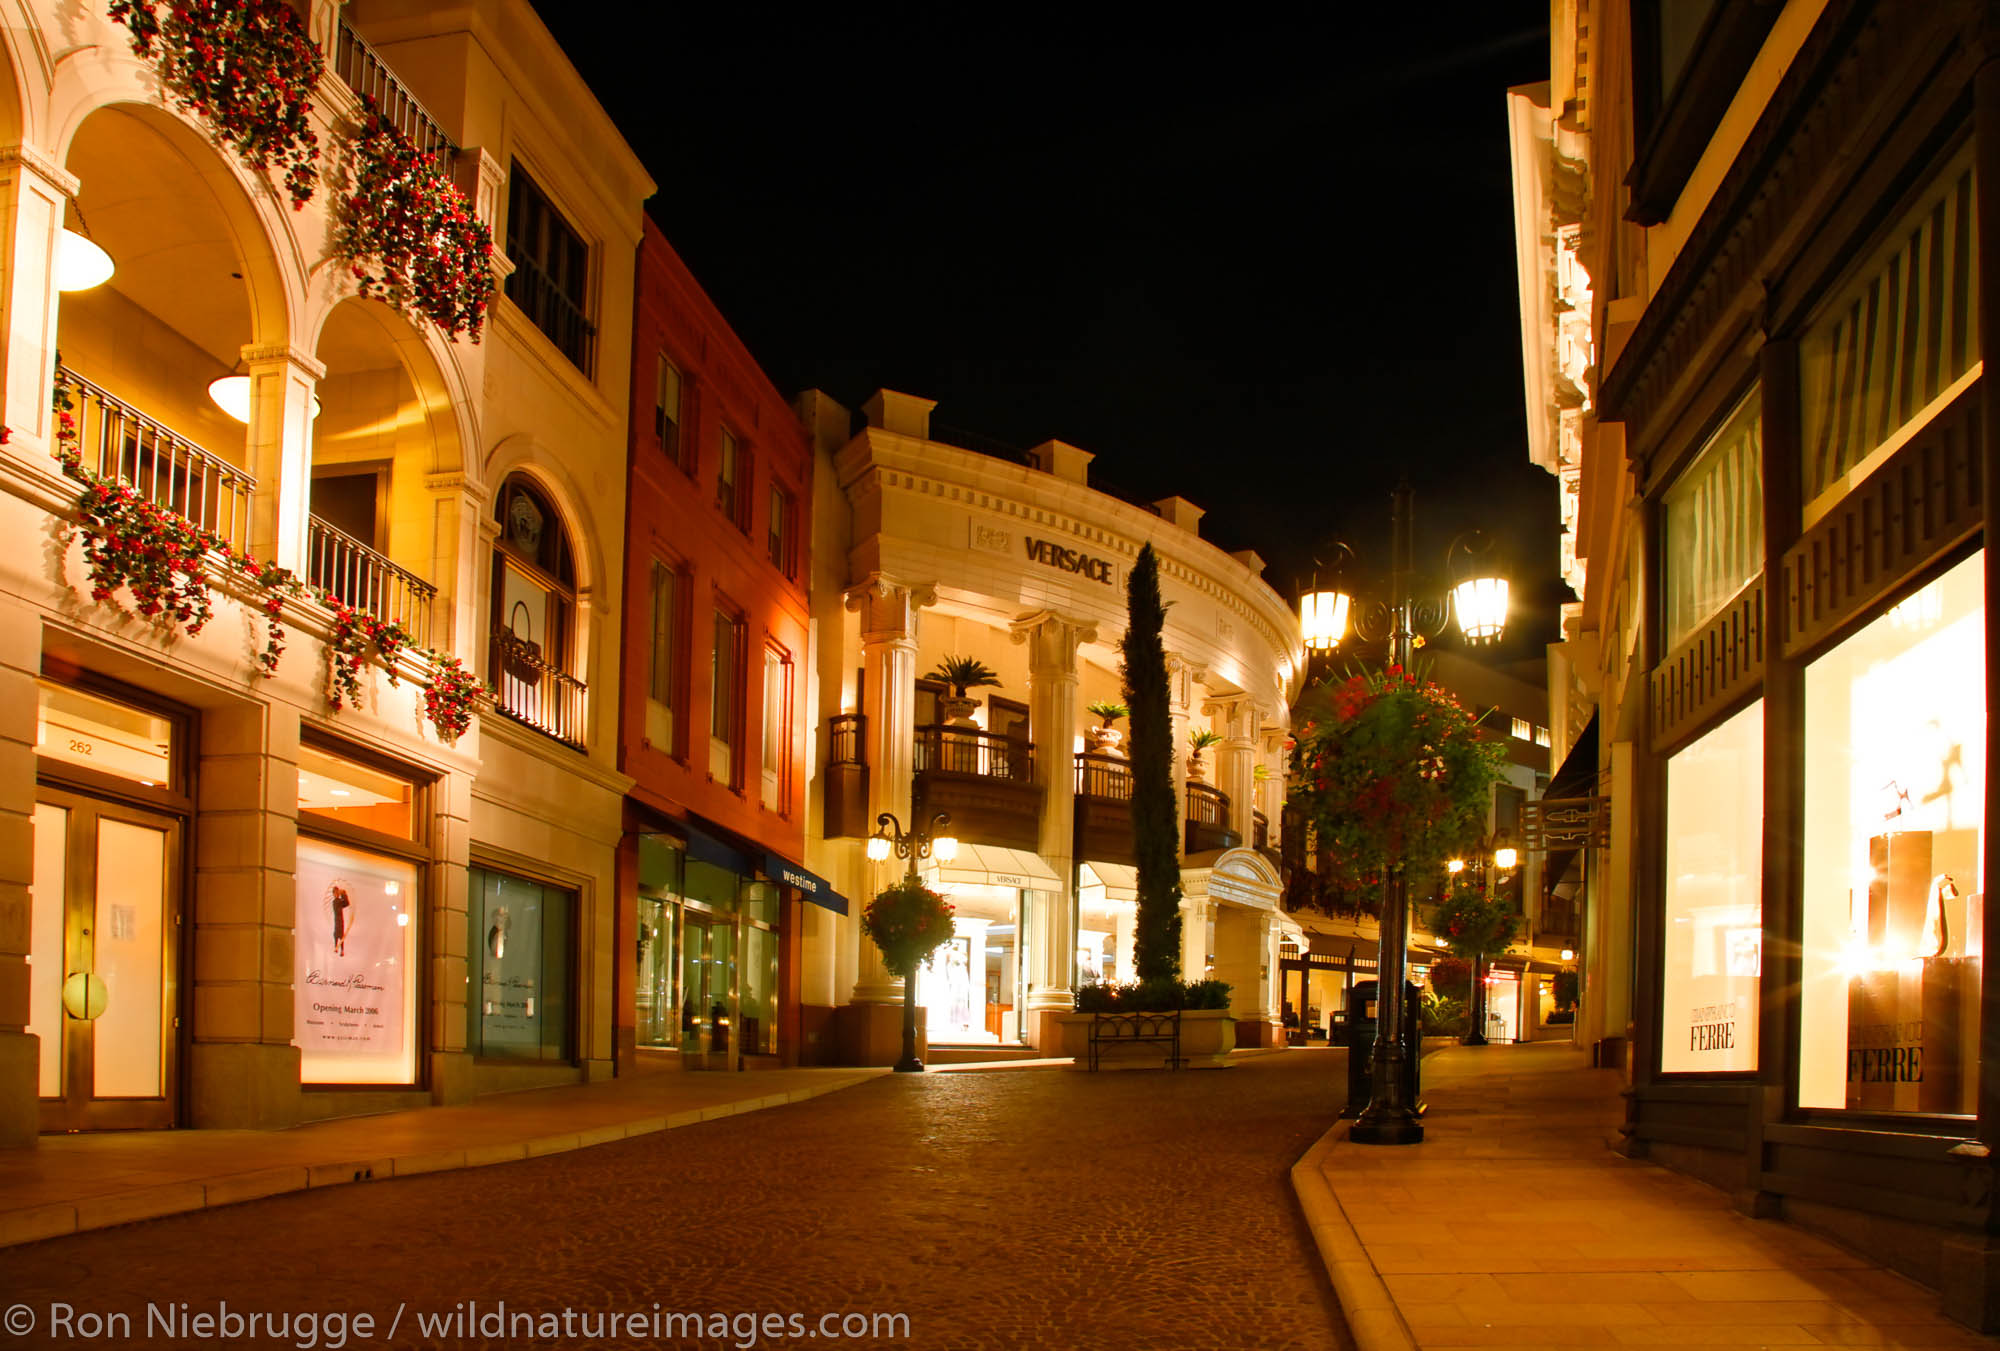 Rodeo Drive in Beverly Hills, Los Angeles, California.